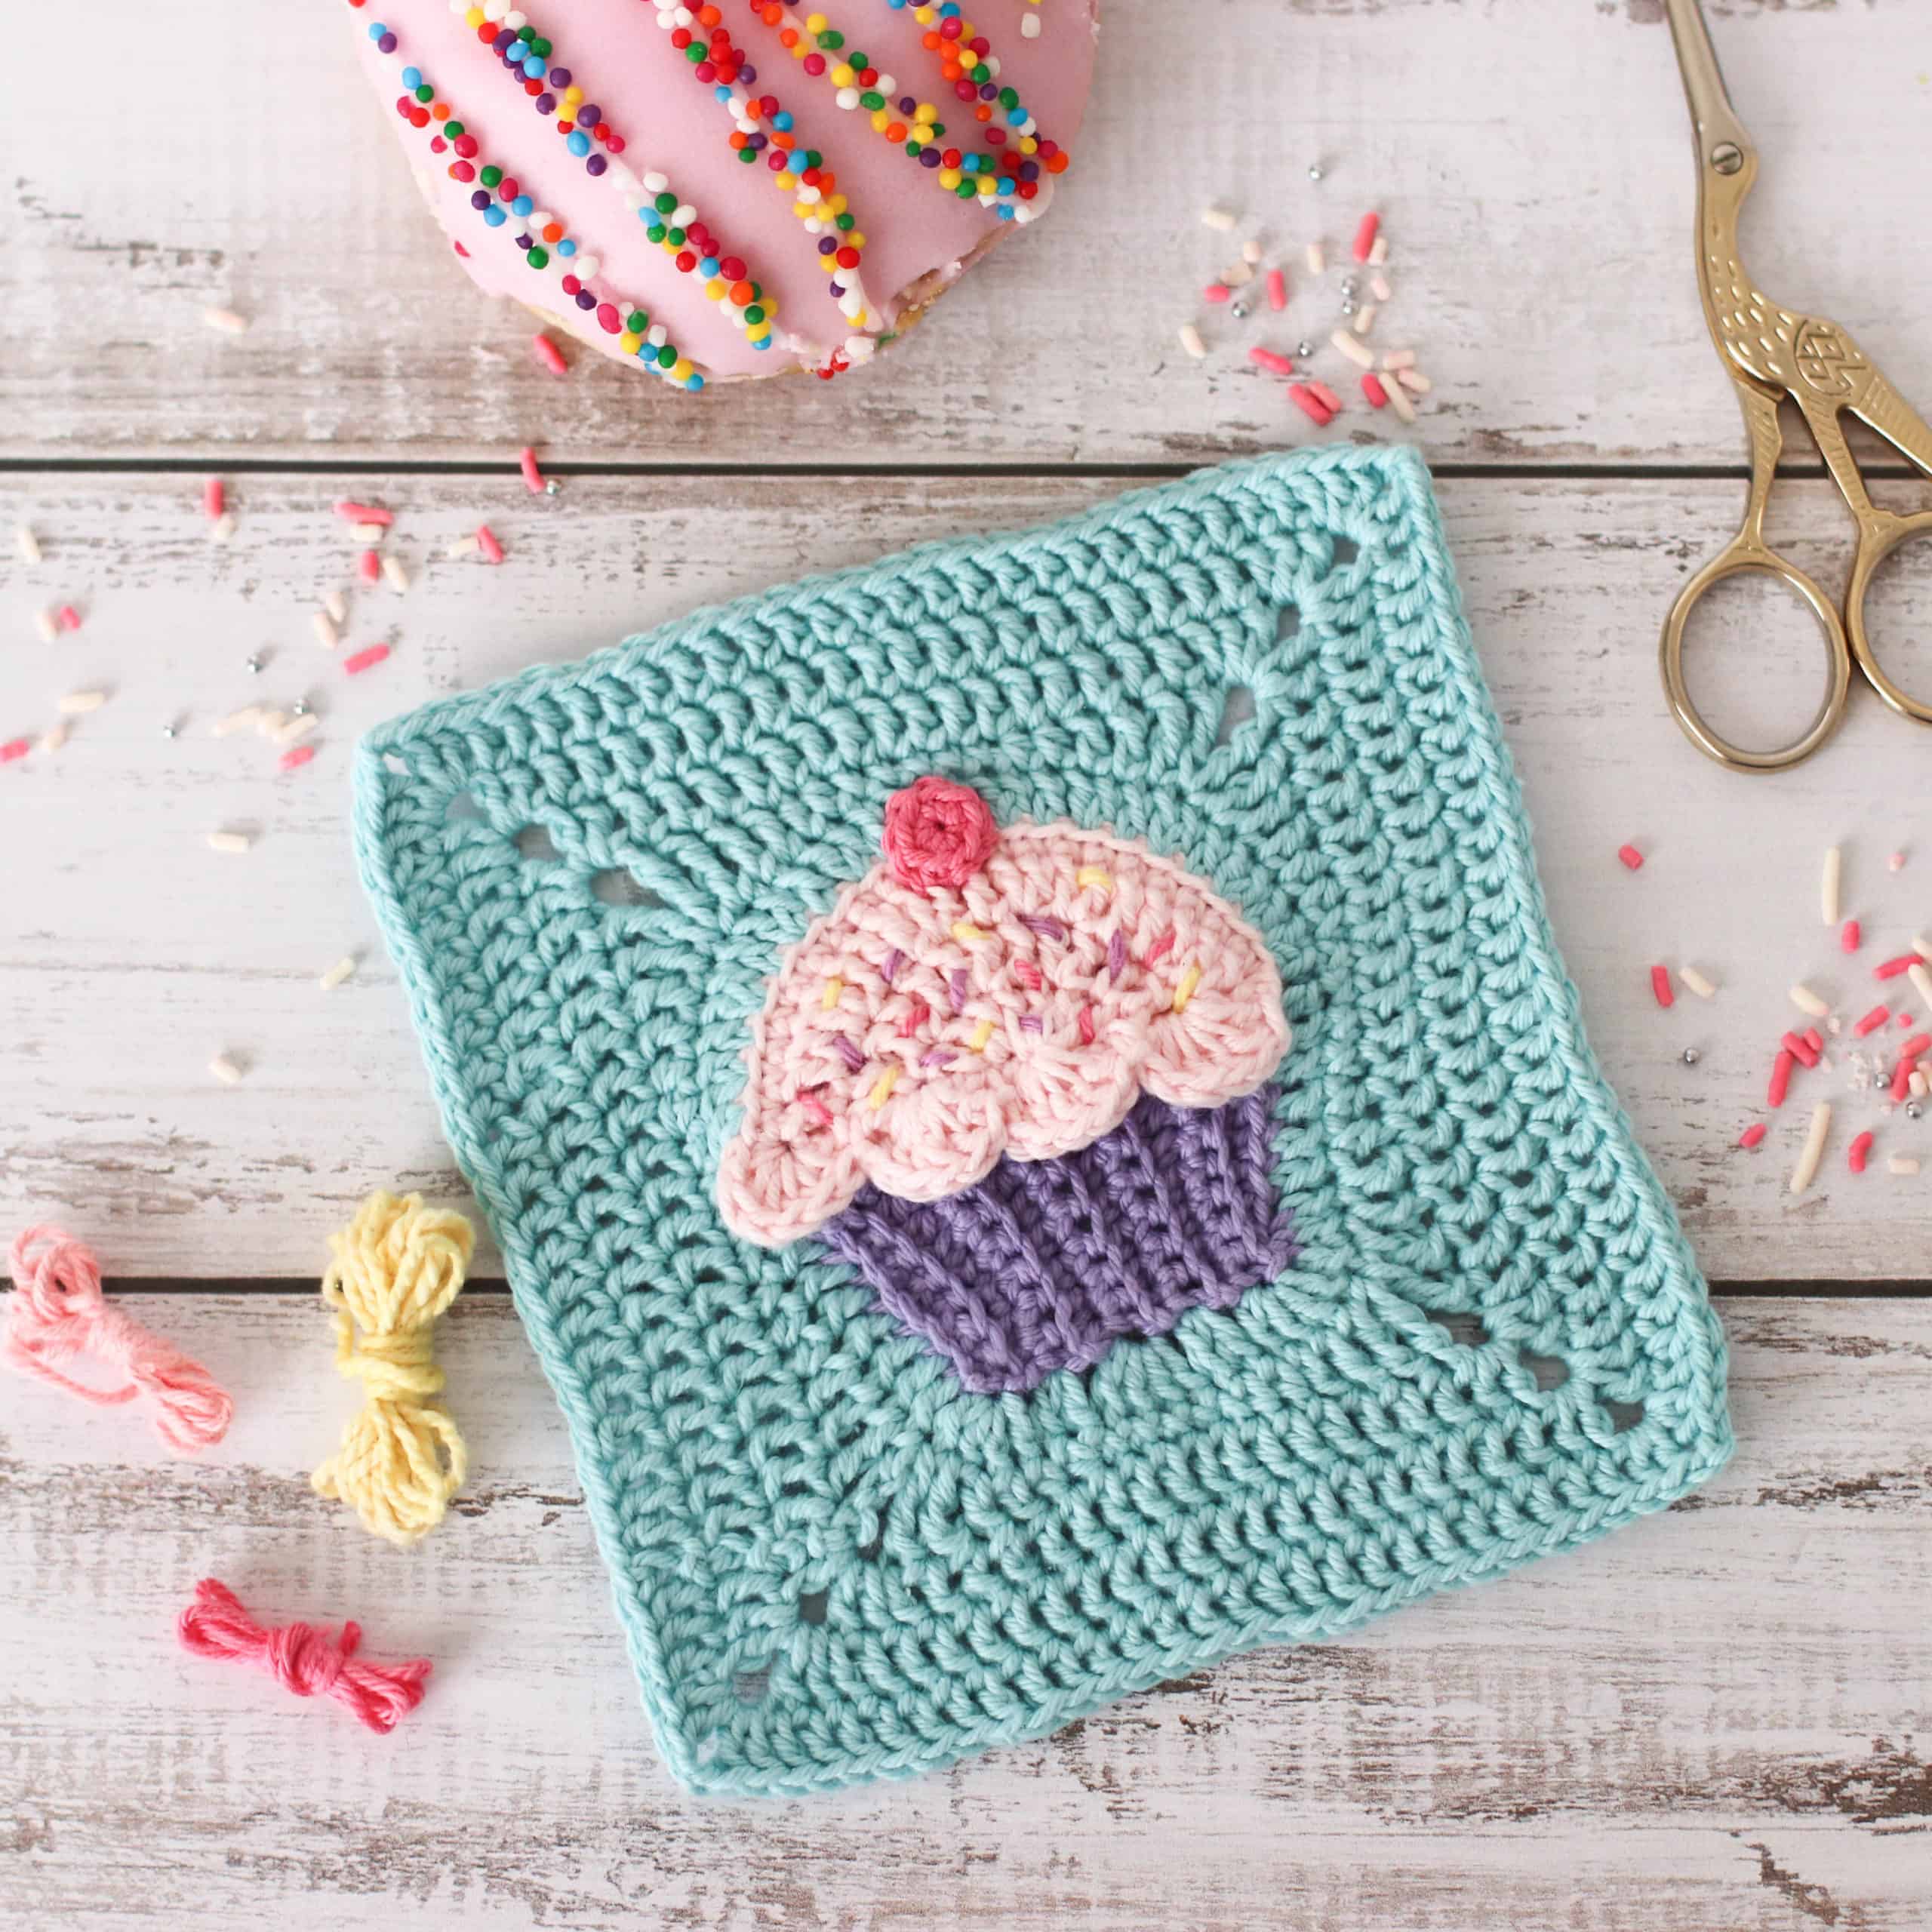 pink crochet cupcake square with a blue background, surrounded by sprinkles, yarn and donuts.